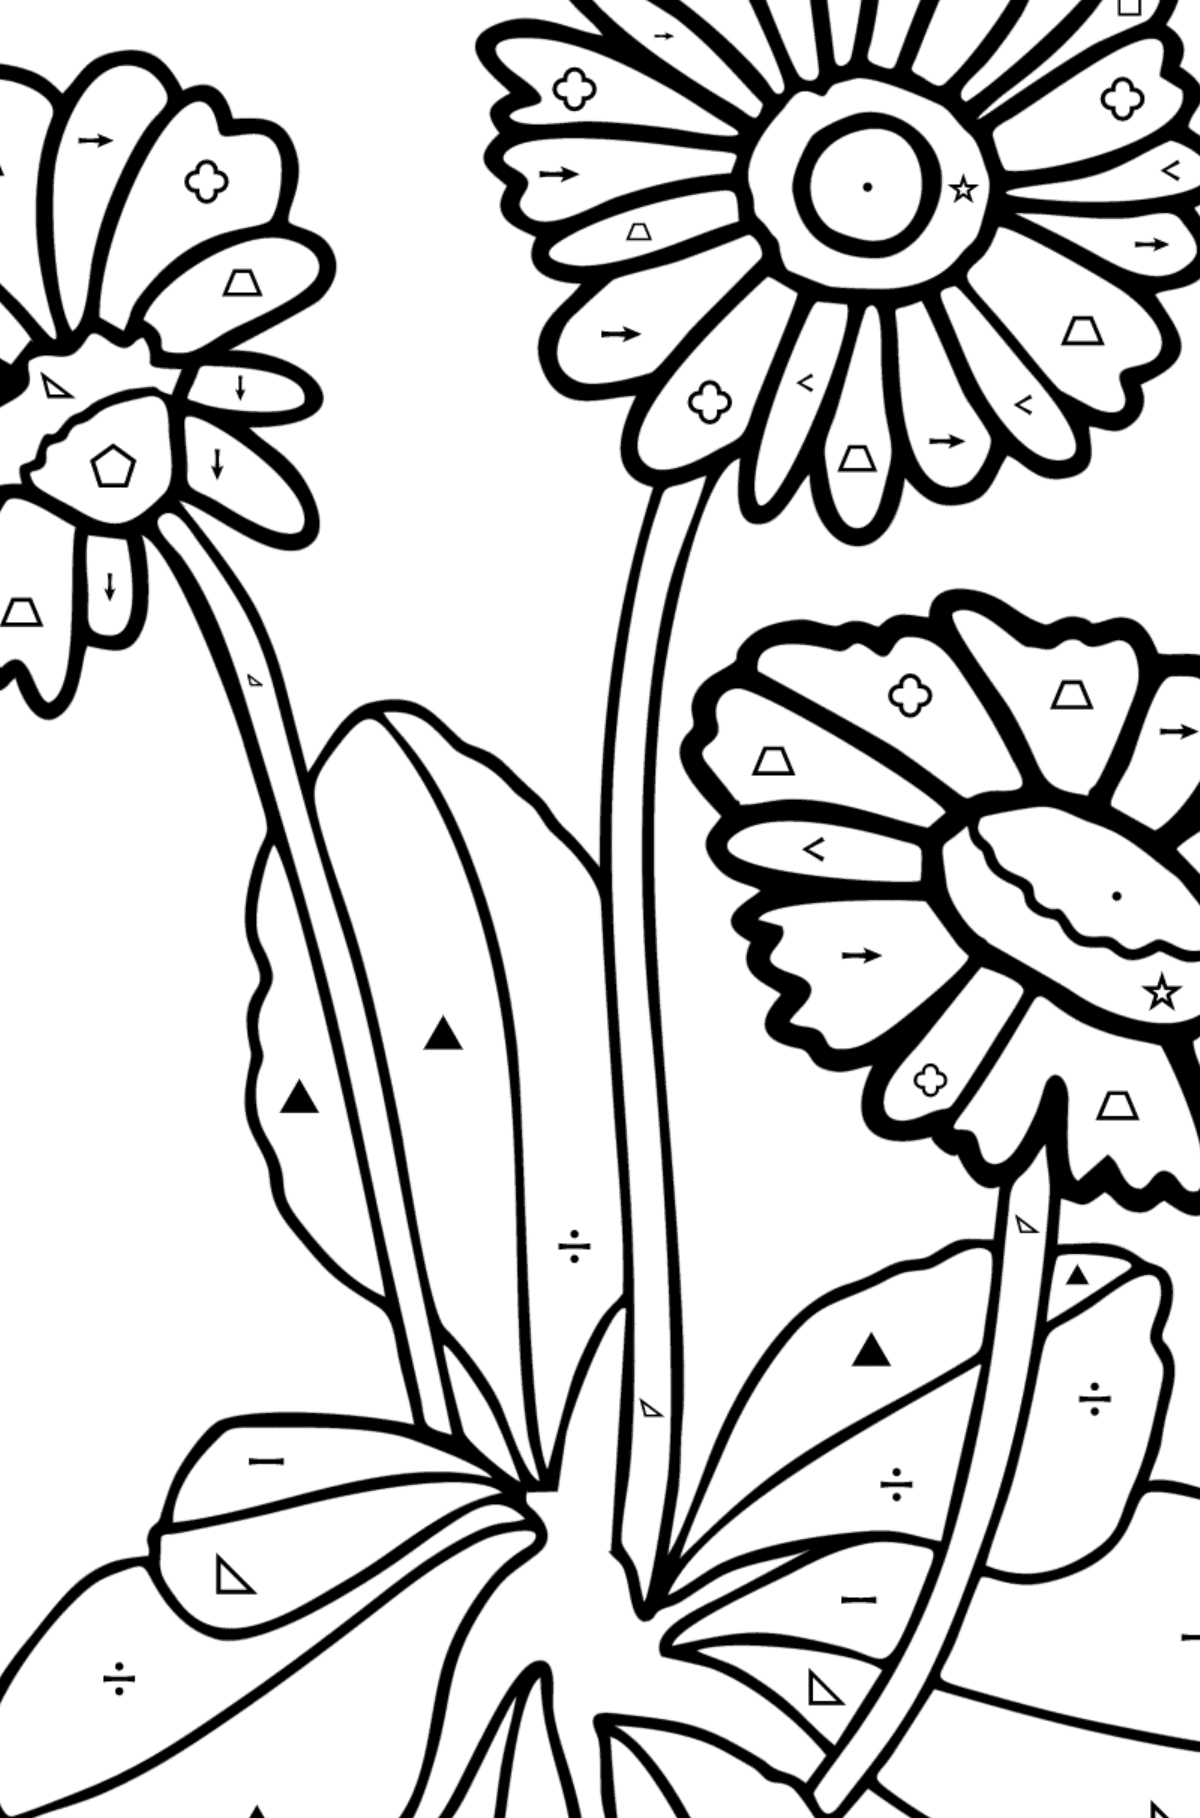 Daisy coloring page - Coloring by Symbols and Geometric Shapes for Kids